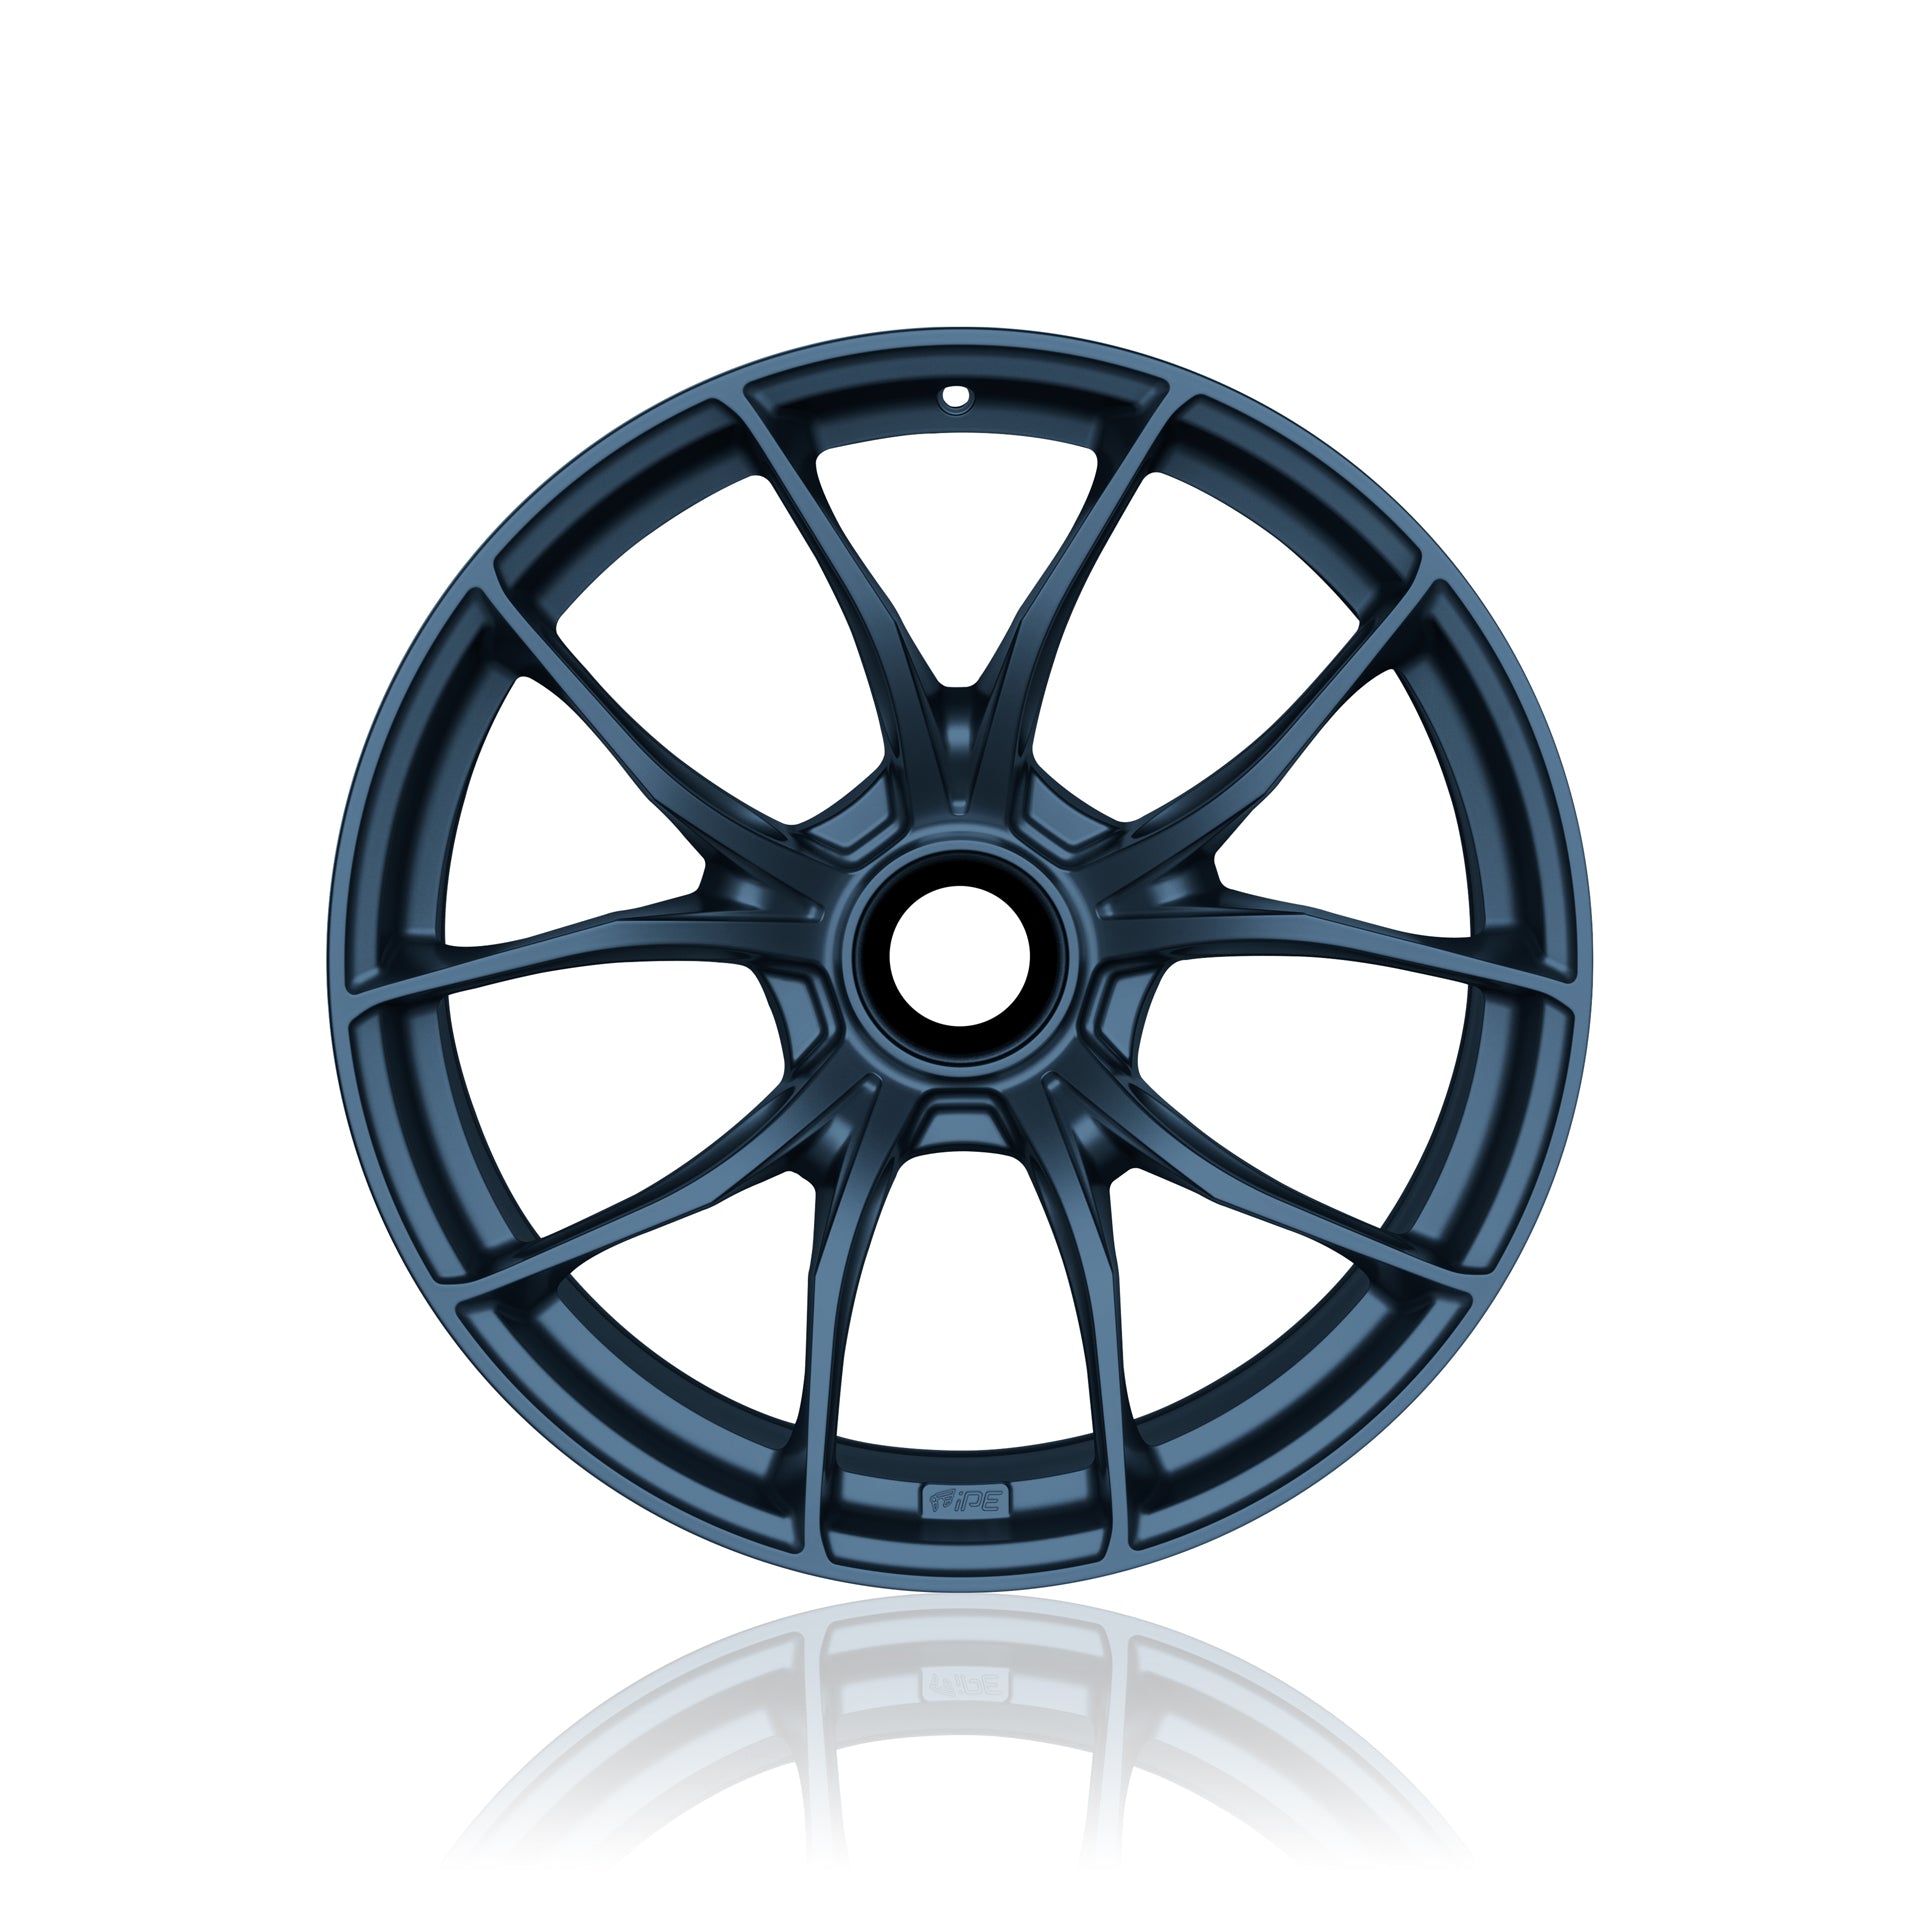 Front view of a blue IPE MFR-01 Magnesium wheel on a white background